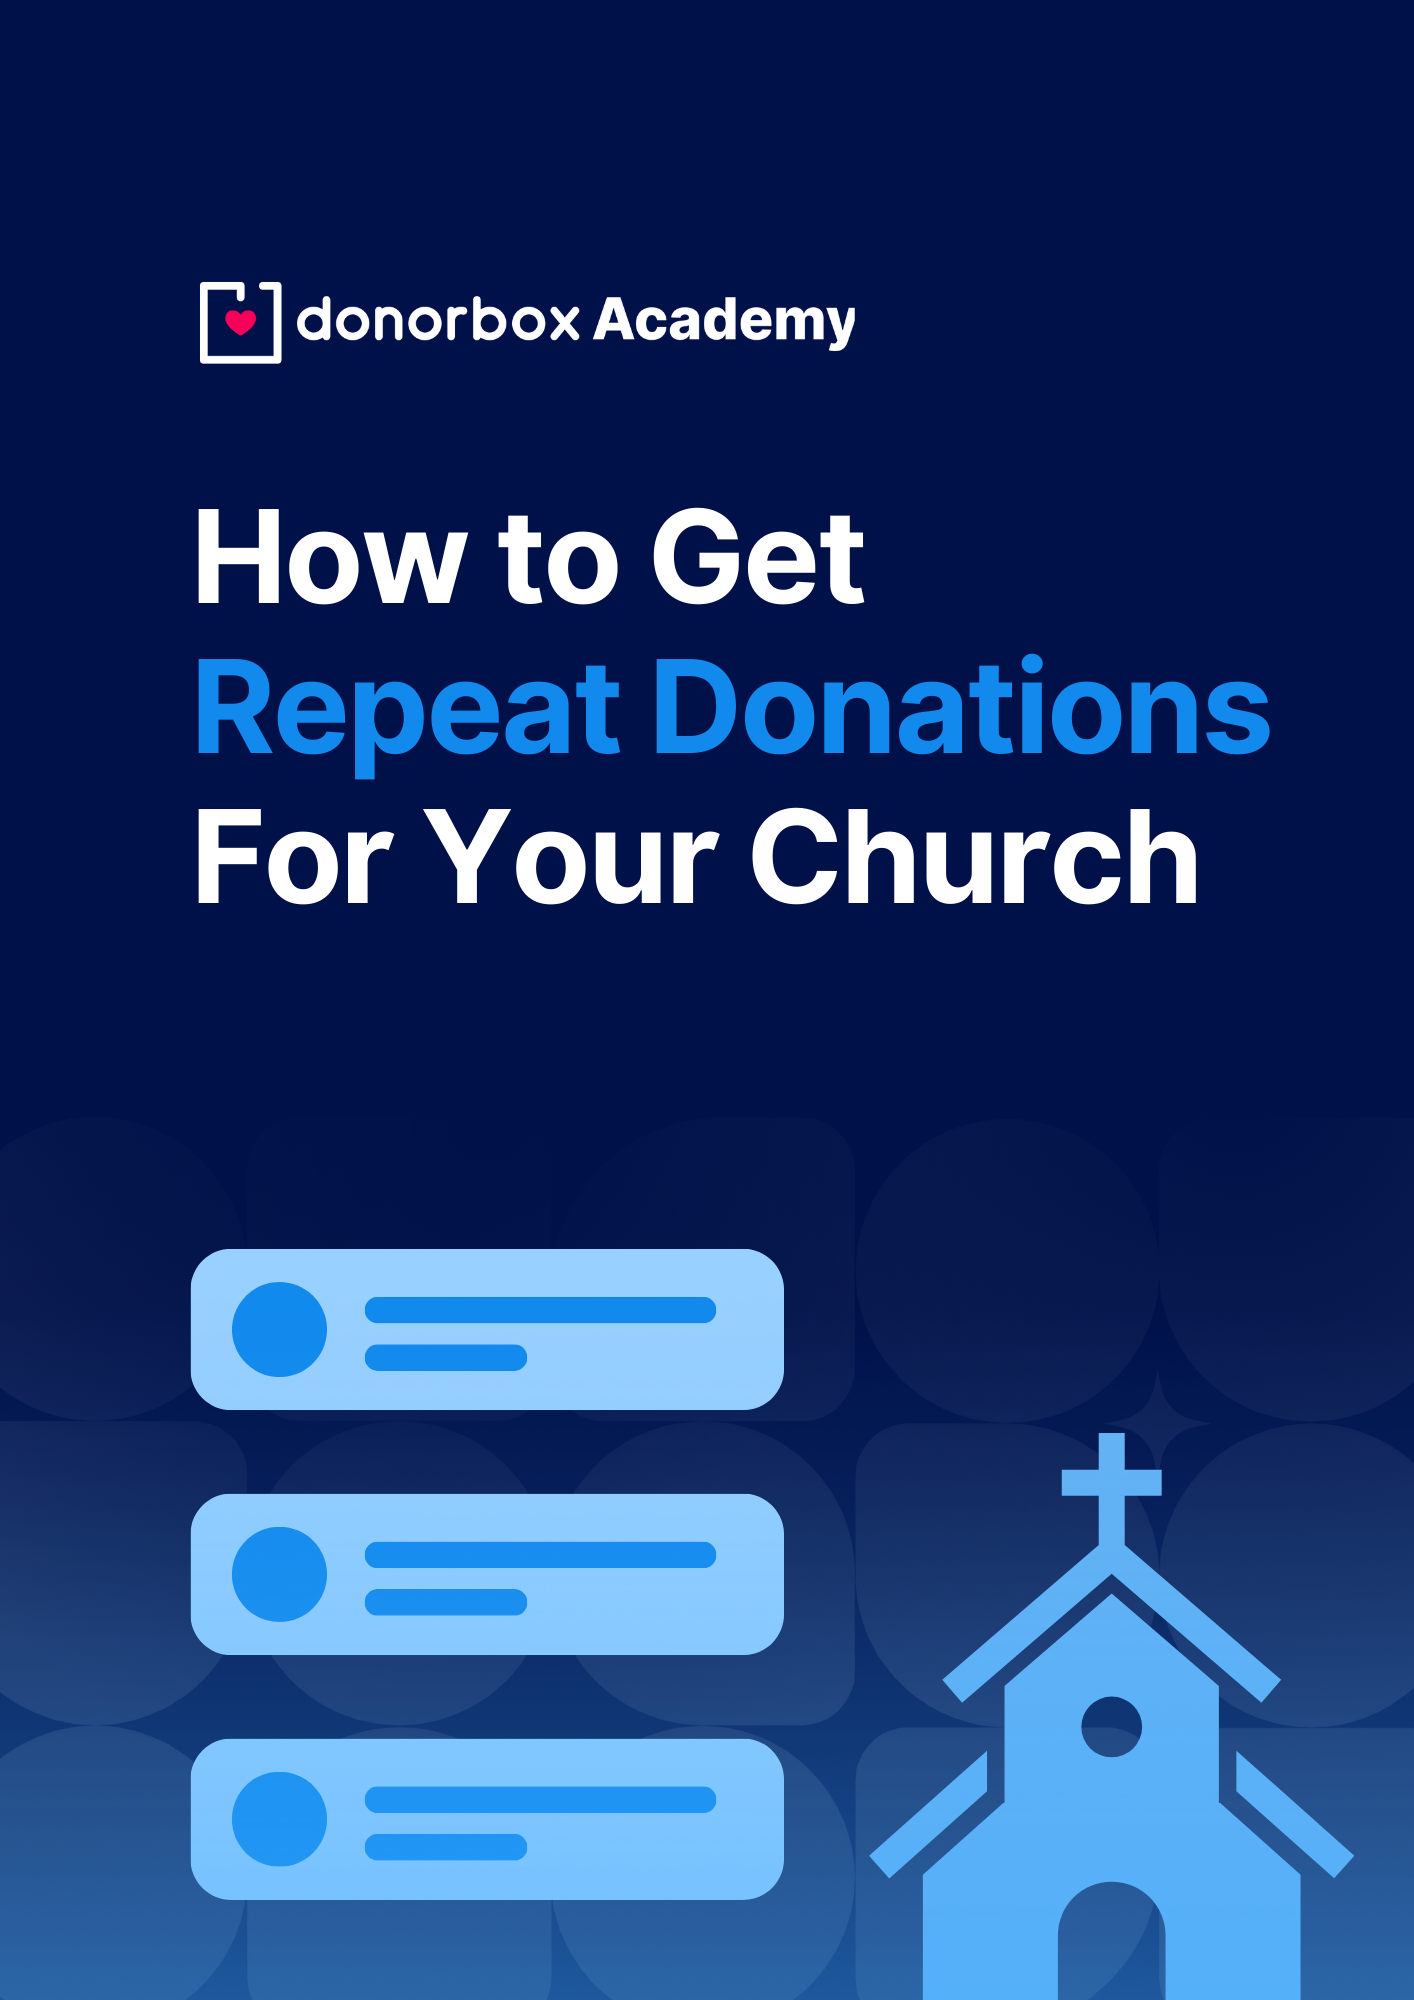 How to Get Repeat Donations for Your Church